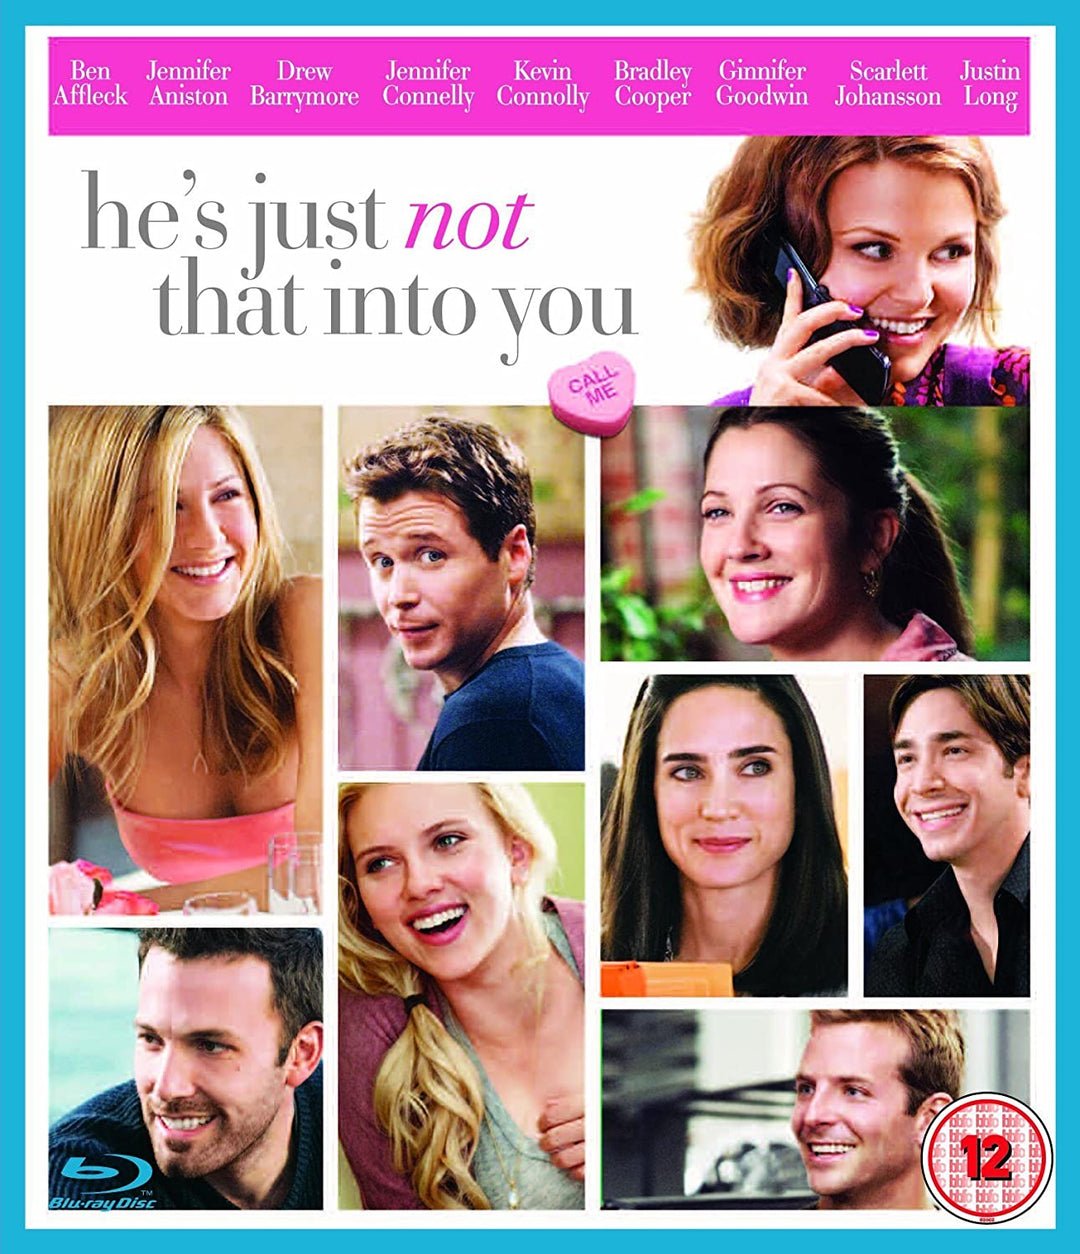 He's Just Not That Into You [2017] - Romance/Rom-com [DVD]